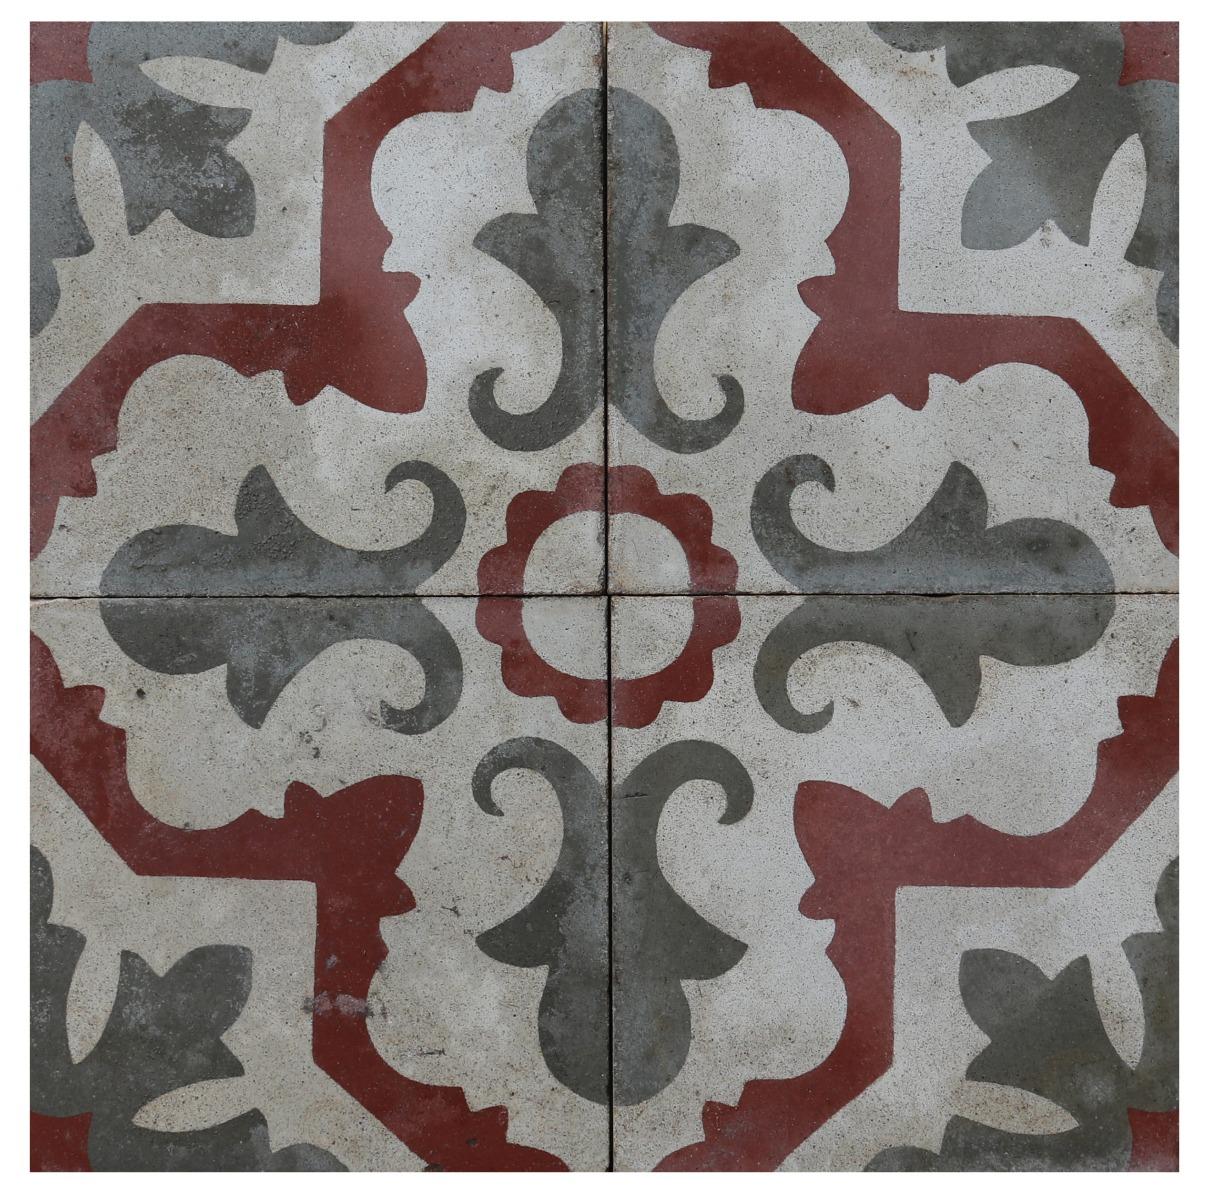 A batch of 105 reclaimed encaustic cement floor tiles. These tiles will cover 4.2 m2 or 45 ft2.